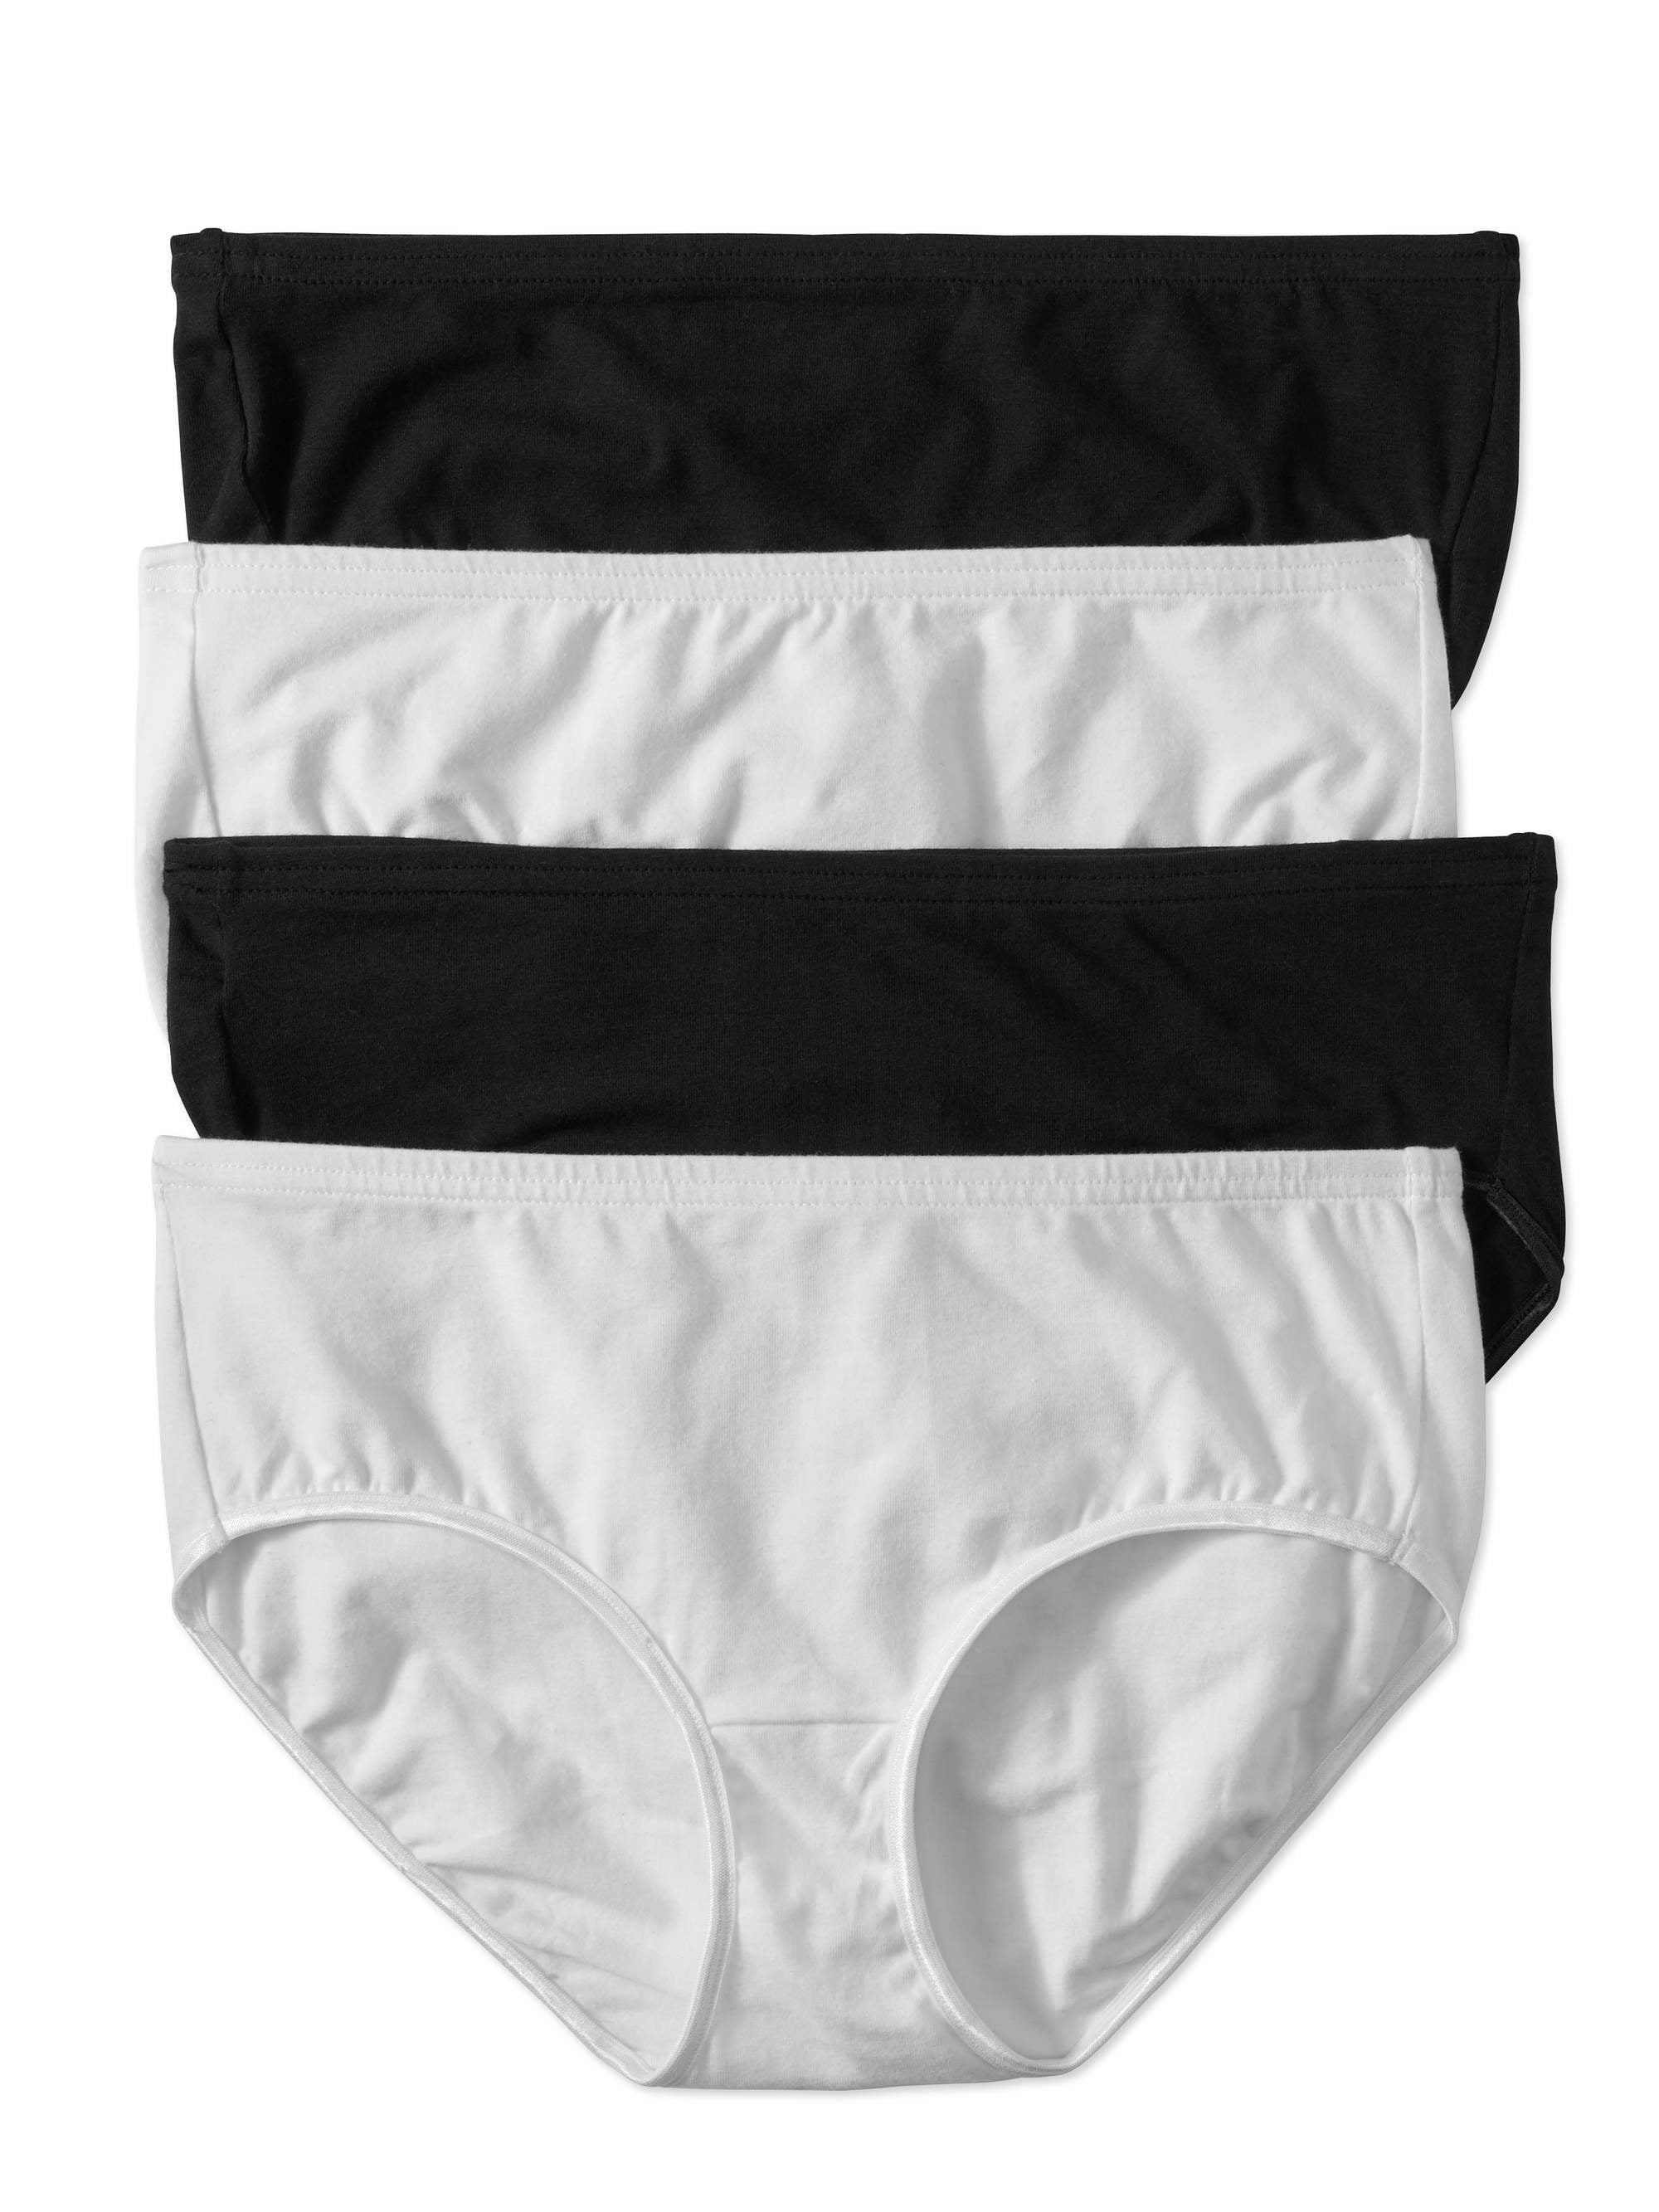 Best Fitting Panty Women's Cotton Stretch Hipster Panties, 4-Pack 